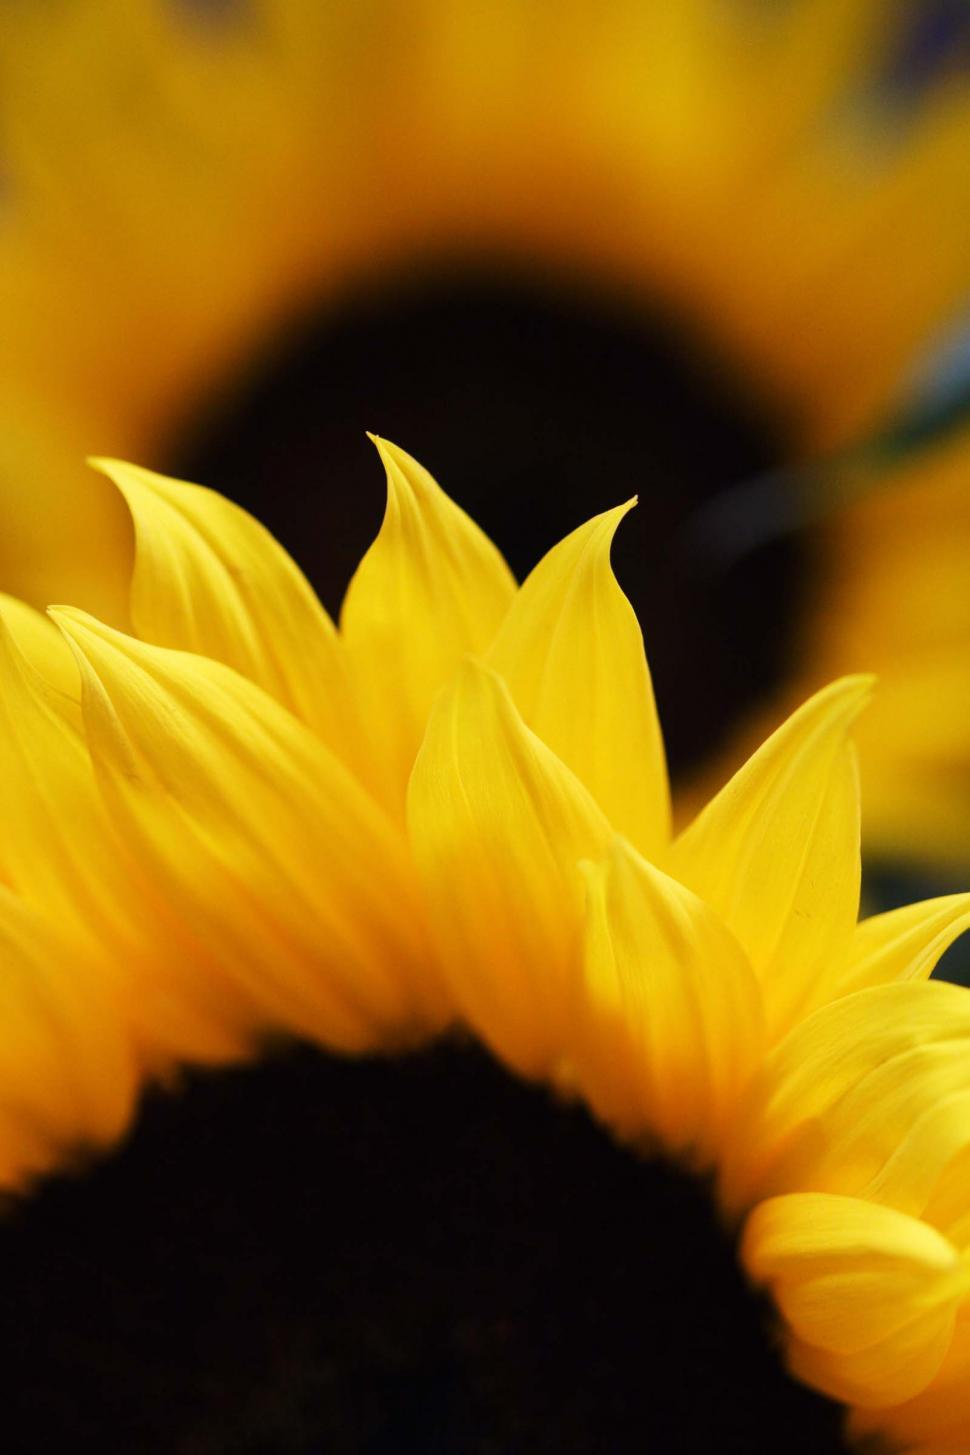 Free Image of Two Sunflowers 